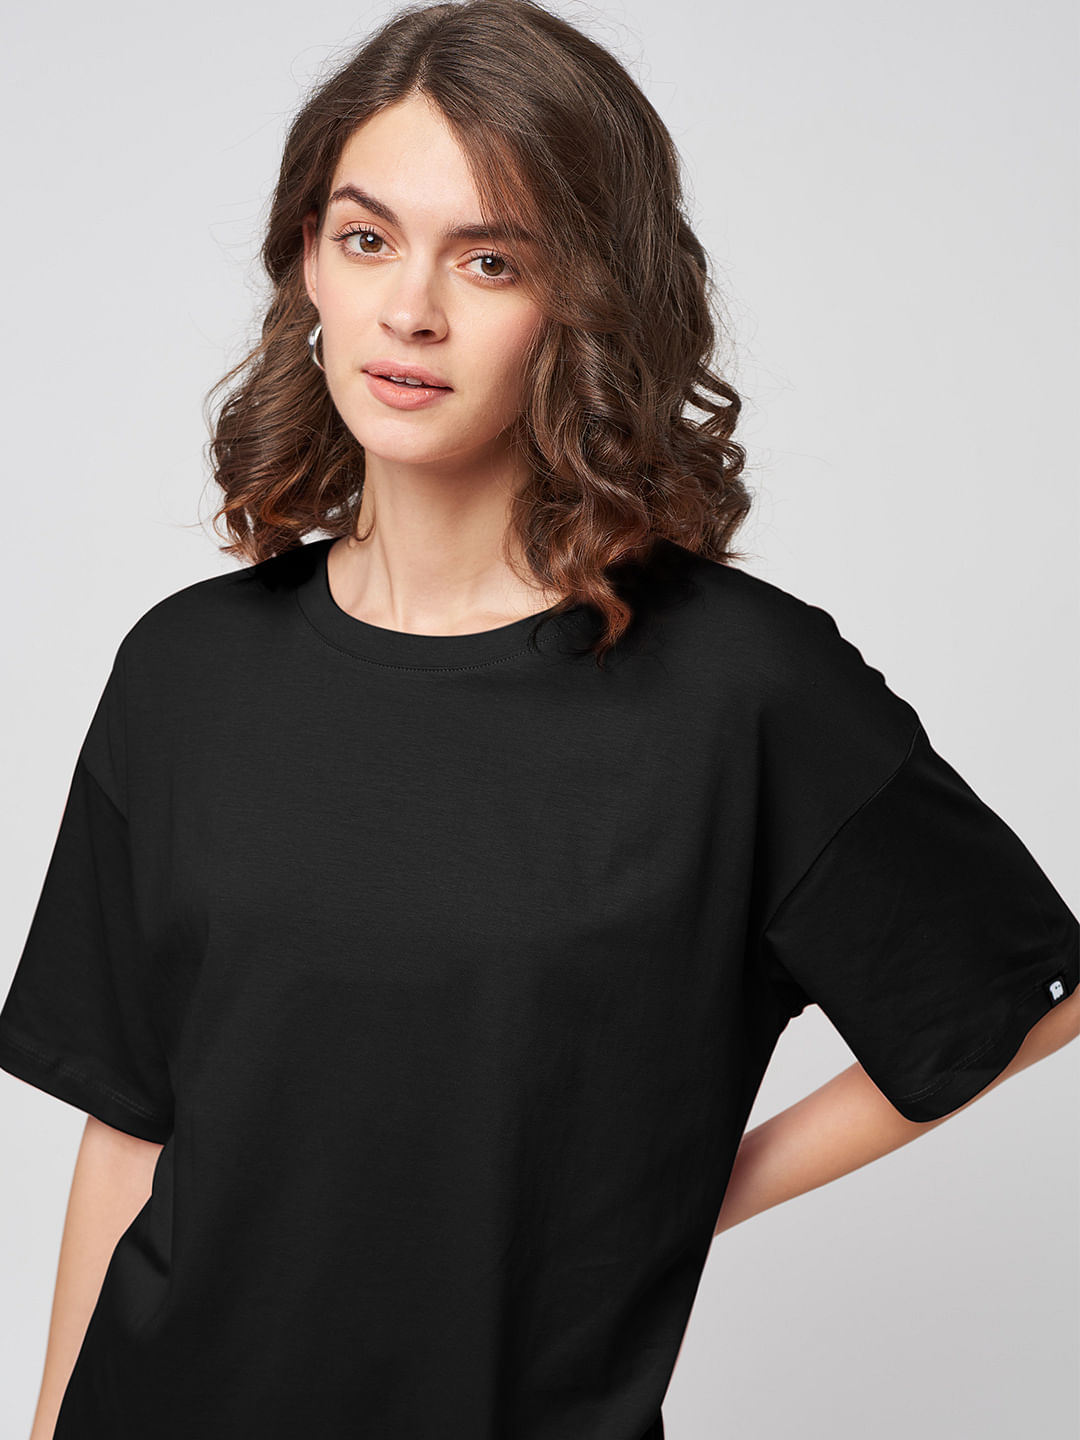 Buy Solids Black Women's Oversized T-Shirt online at The Souled Store